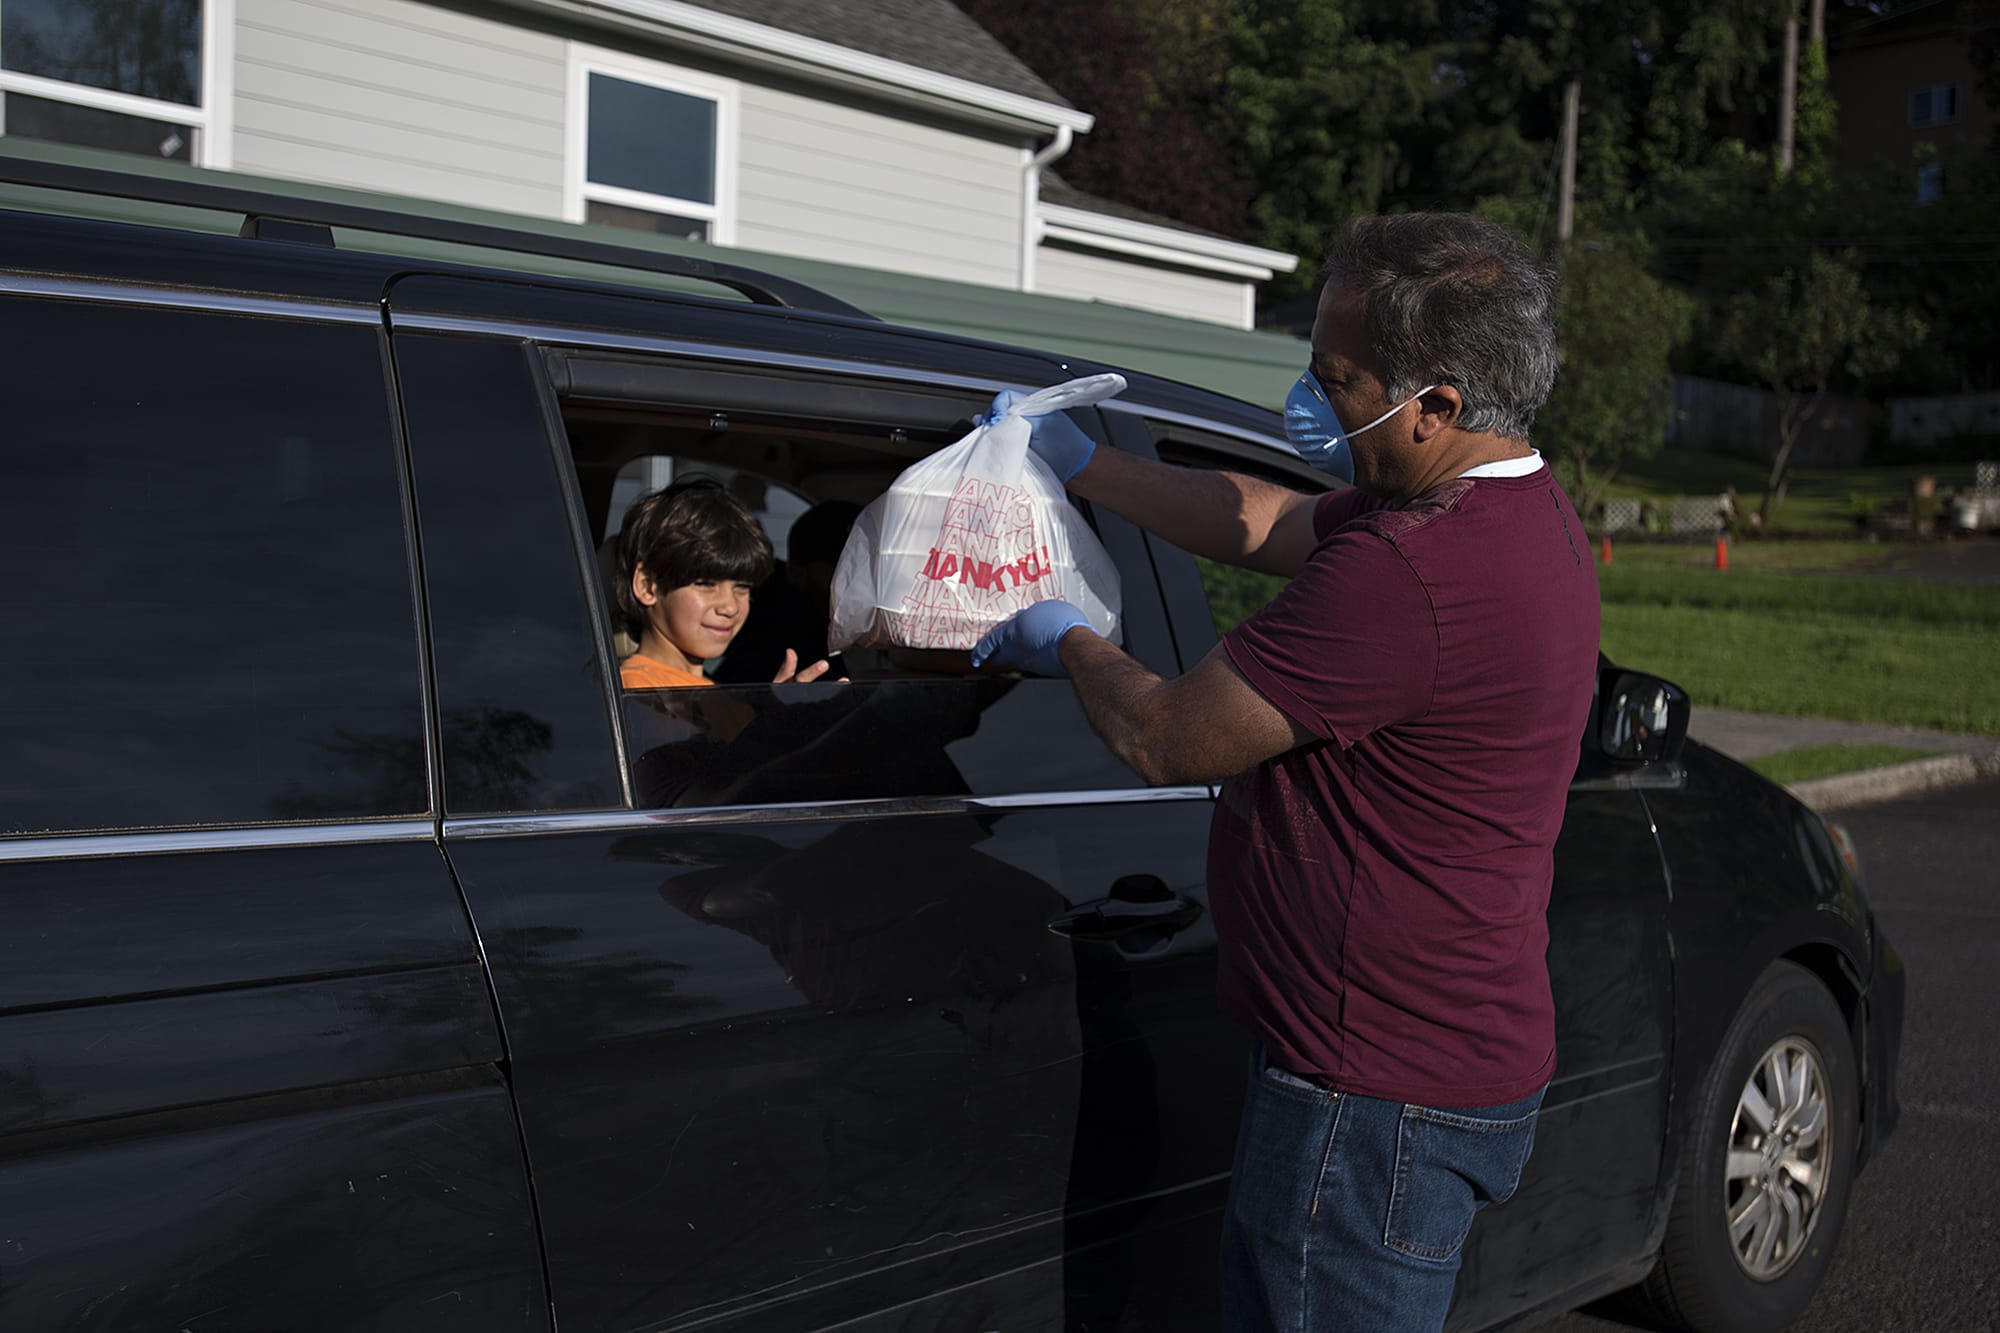 Abdullah Hariri, 7, left, helps collect meals for his family from treasurer Ahmad Qayoumi at the Islamic Society of Southwest Washington on Sunday evening, May 17, 2020. The local mosque is doing meals-to-go for Ramadan this year because of concerns about COVID-19.